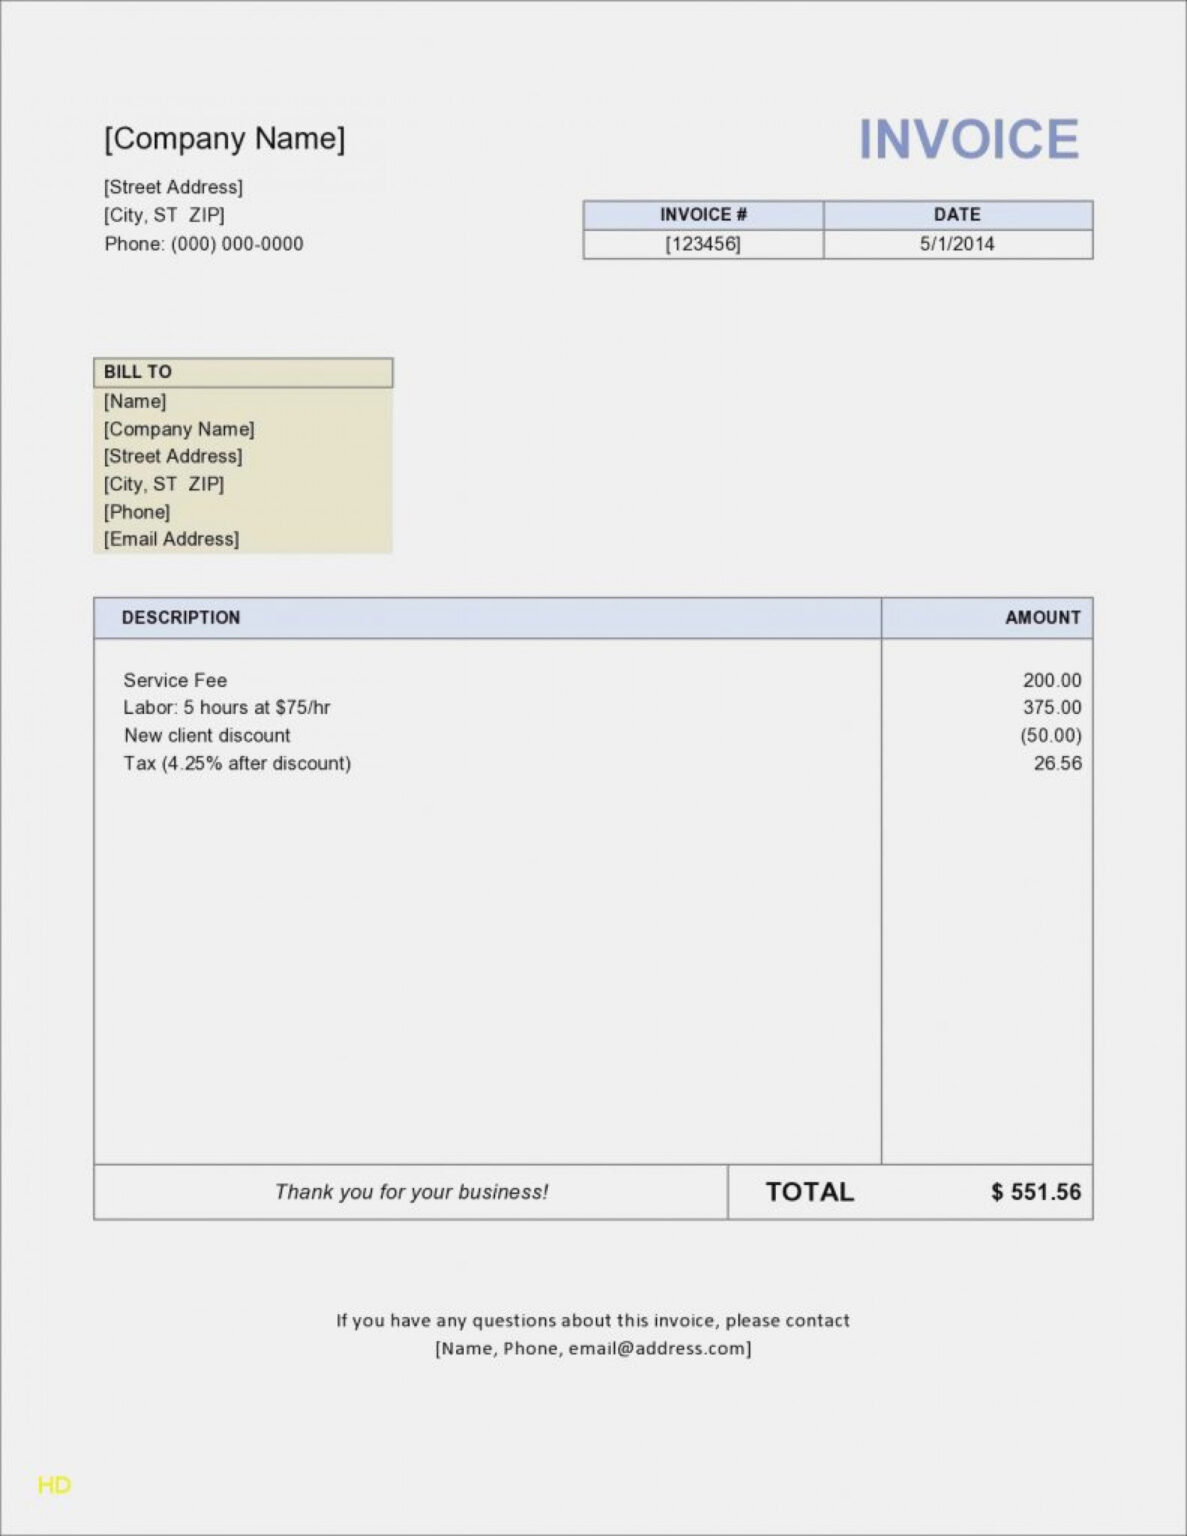 how to create an invoice in word 2010